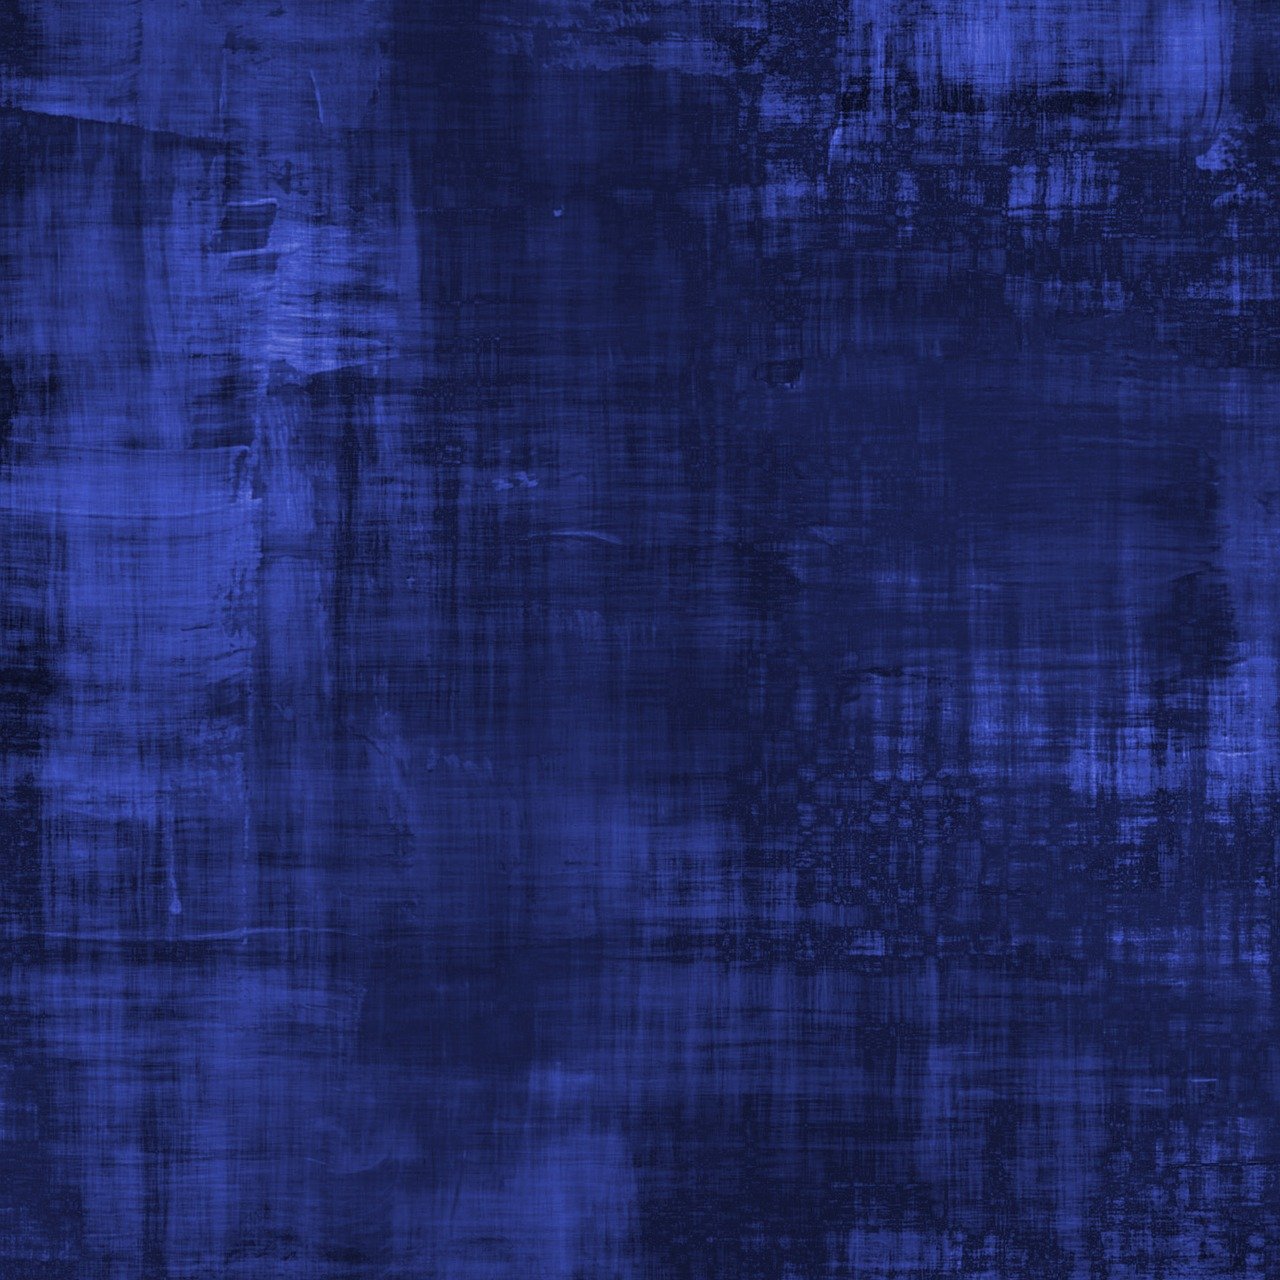 a dark blue background with a grunge effect, a digital rendering, abstract expressionism, synthetic polymer paint on linen, transparent background, 4k high res, stock photo